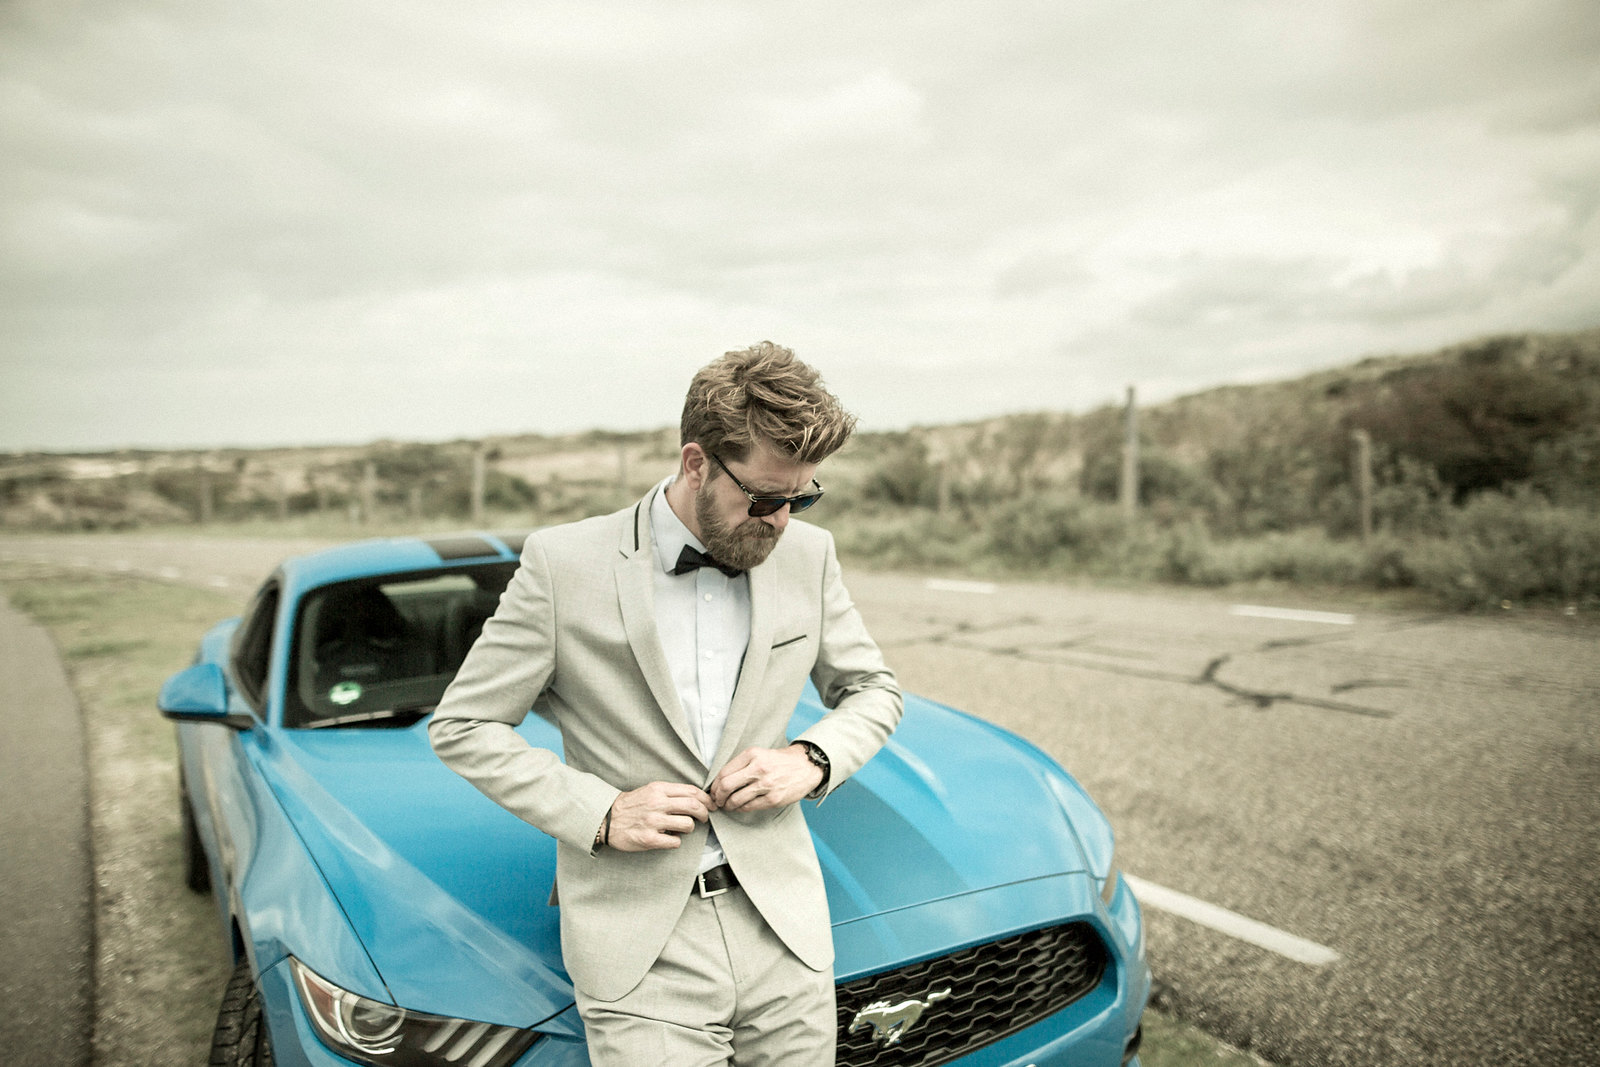 max outfit lookbook dandy chic gentleman modern style grey suit zaraman dapper persol sunglasses chic going out wedding ford mustang pony car max bechmann fotografie film düsseldorf nrw germany germanblogger maleblogger männerstyle modeblog cats & dogs 6